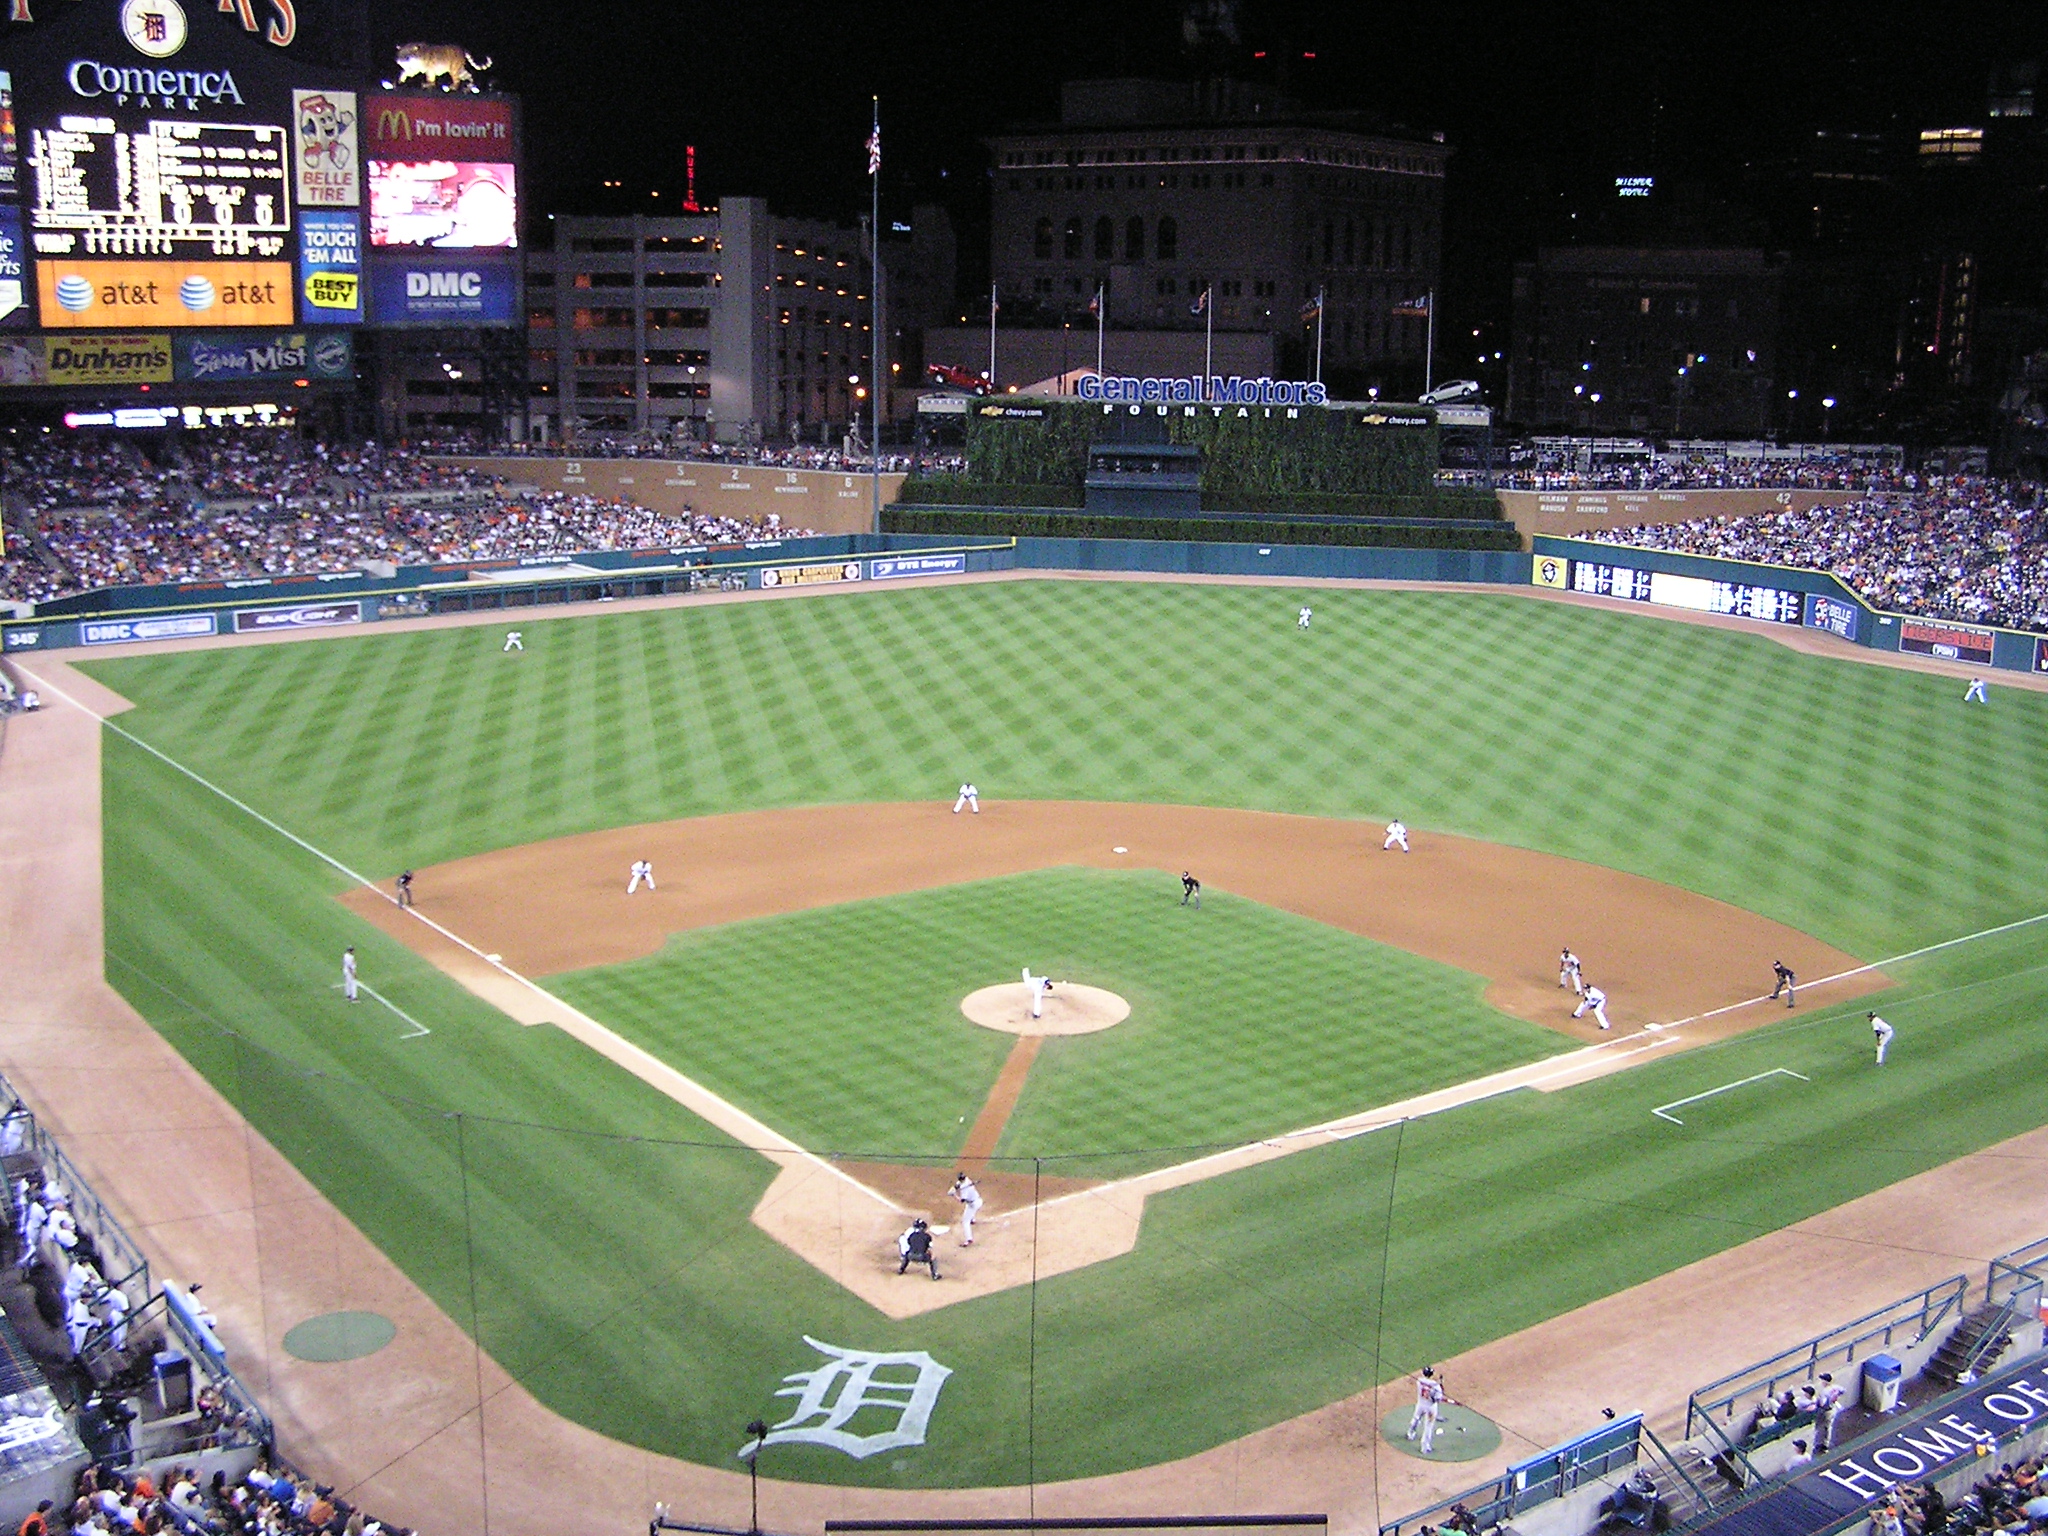 Game Action - Comerica Park - Home of the Tigers